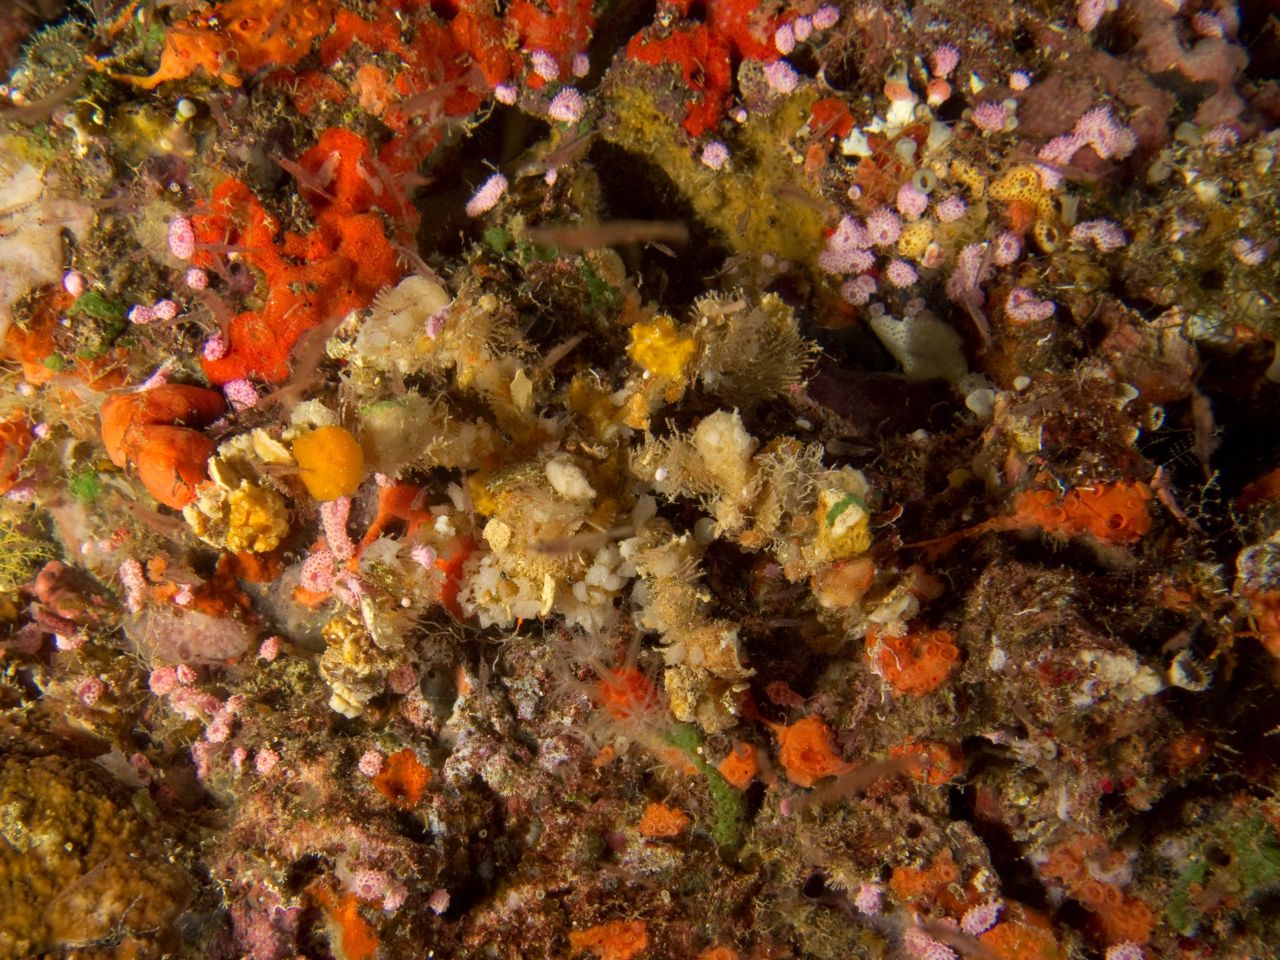 I Spy A Decorator Crab by Michelle